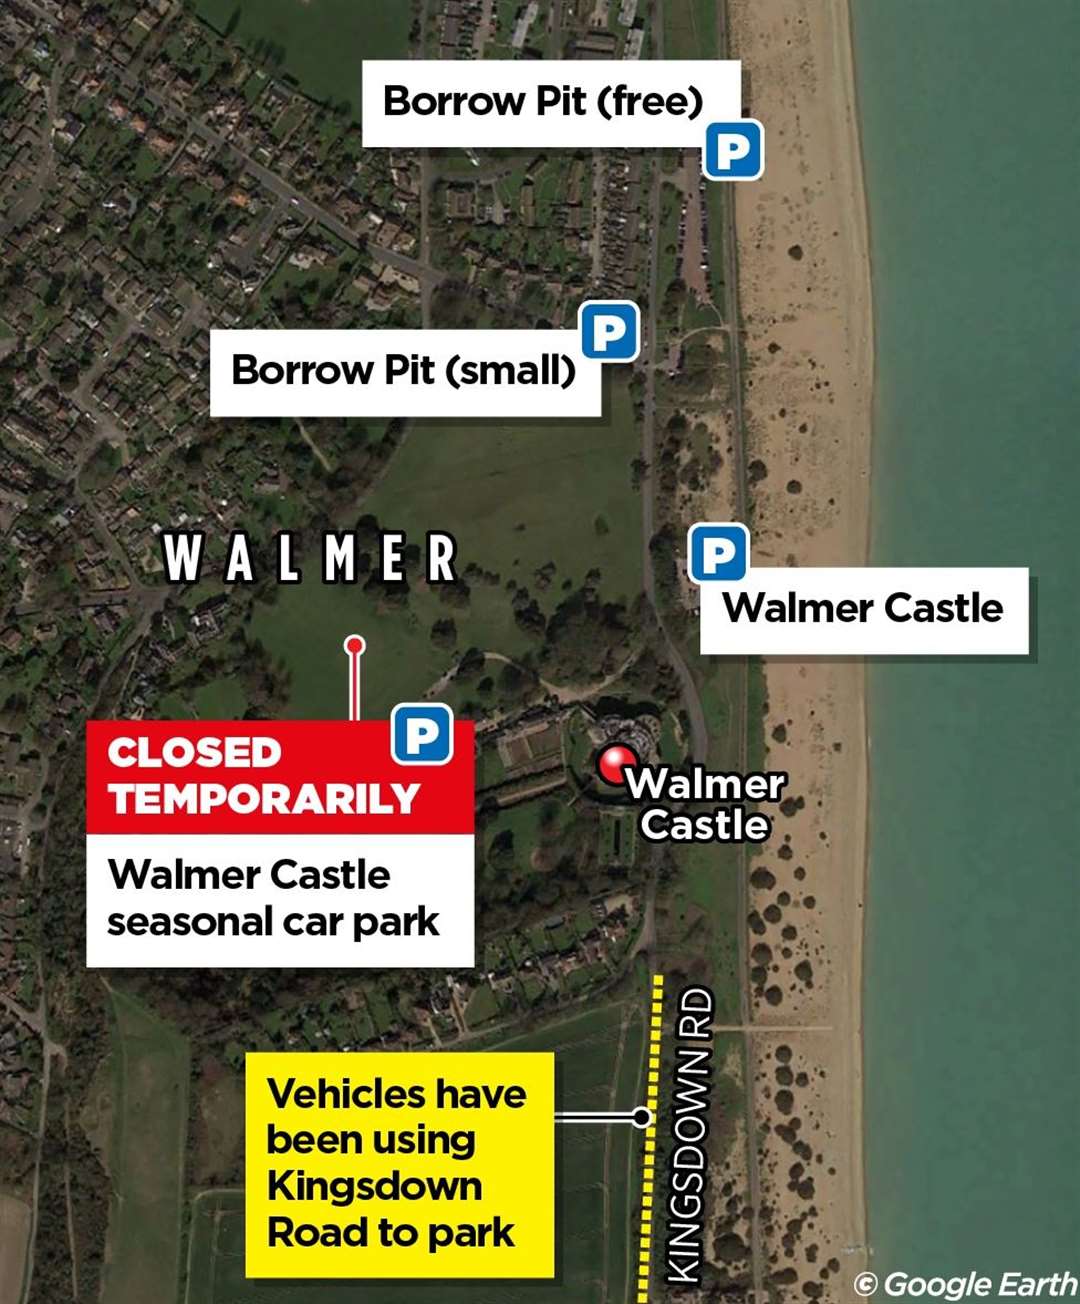 While the seasonal car park is temporarily closed, visitors to Walmer Castle and gardens have been making use of Kingsdown Road for parking when the smaller car parks are full